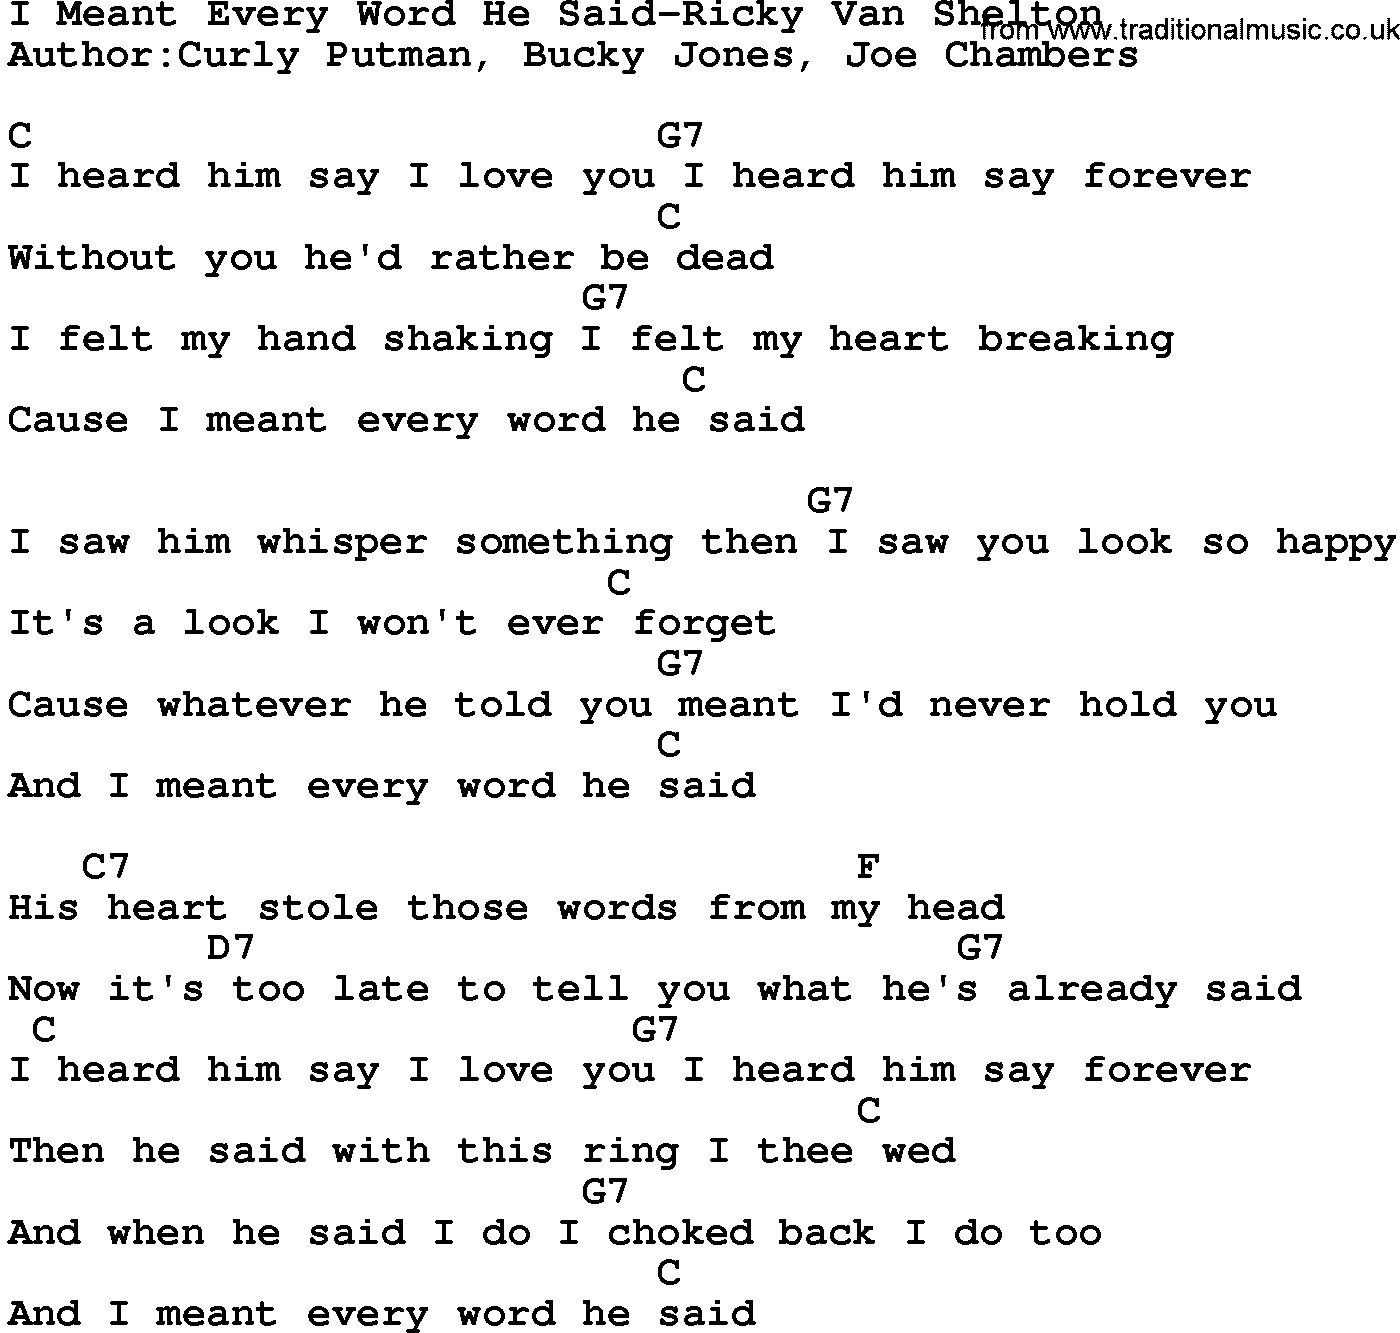 Country music song: I Meant Every Word He Said-Ricky Van Shelton  lyrics and chords